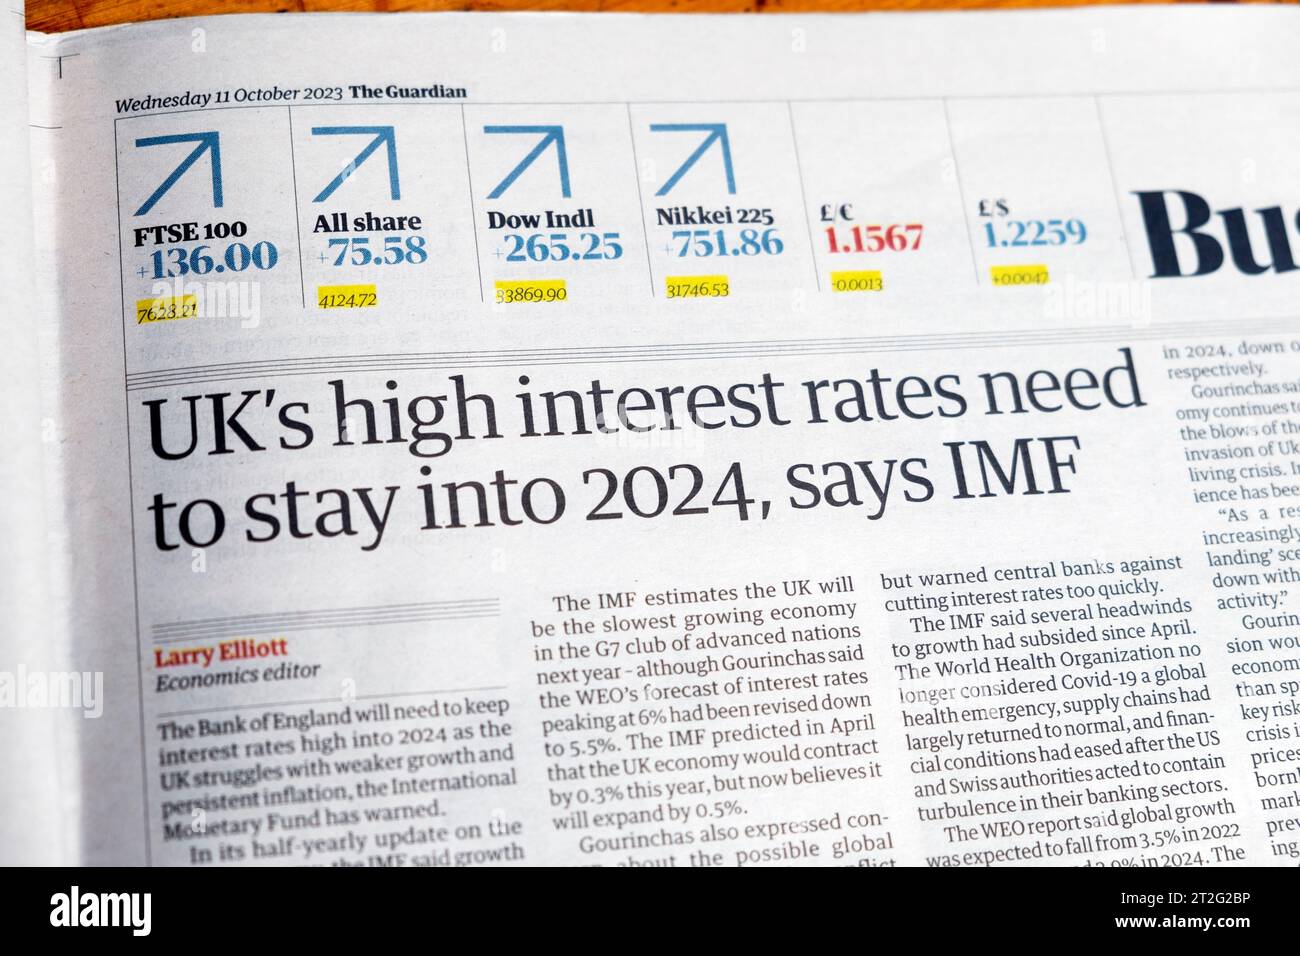 'UK's high interest rates to stay into 2024, says IMF' Guardian newspaper headline Bank of England Business section article 11 October 2023 London UK Stock Photo